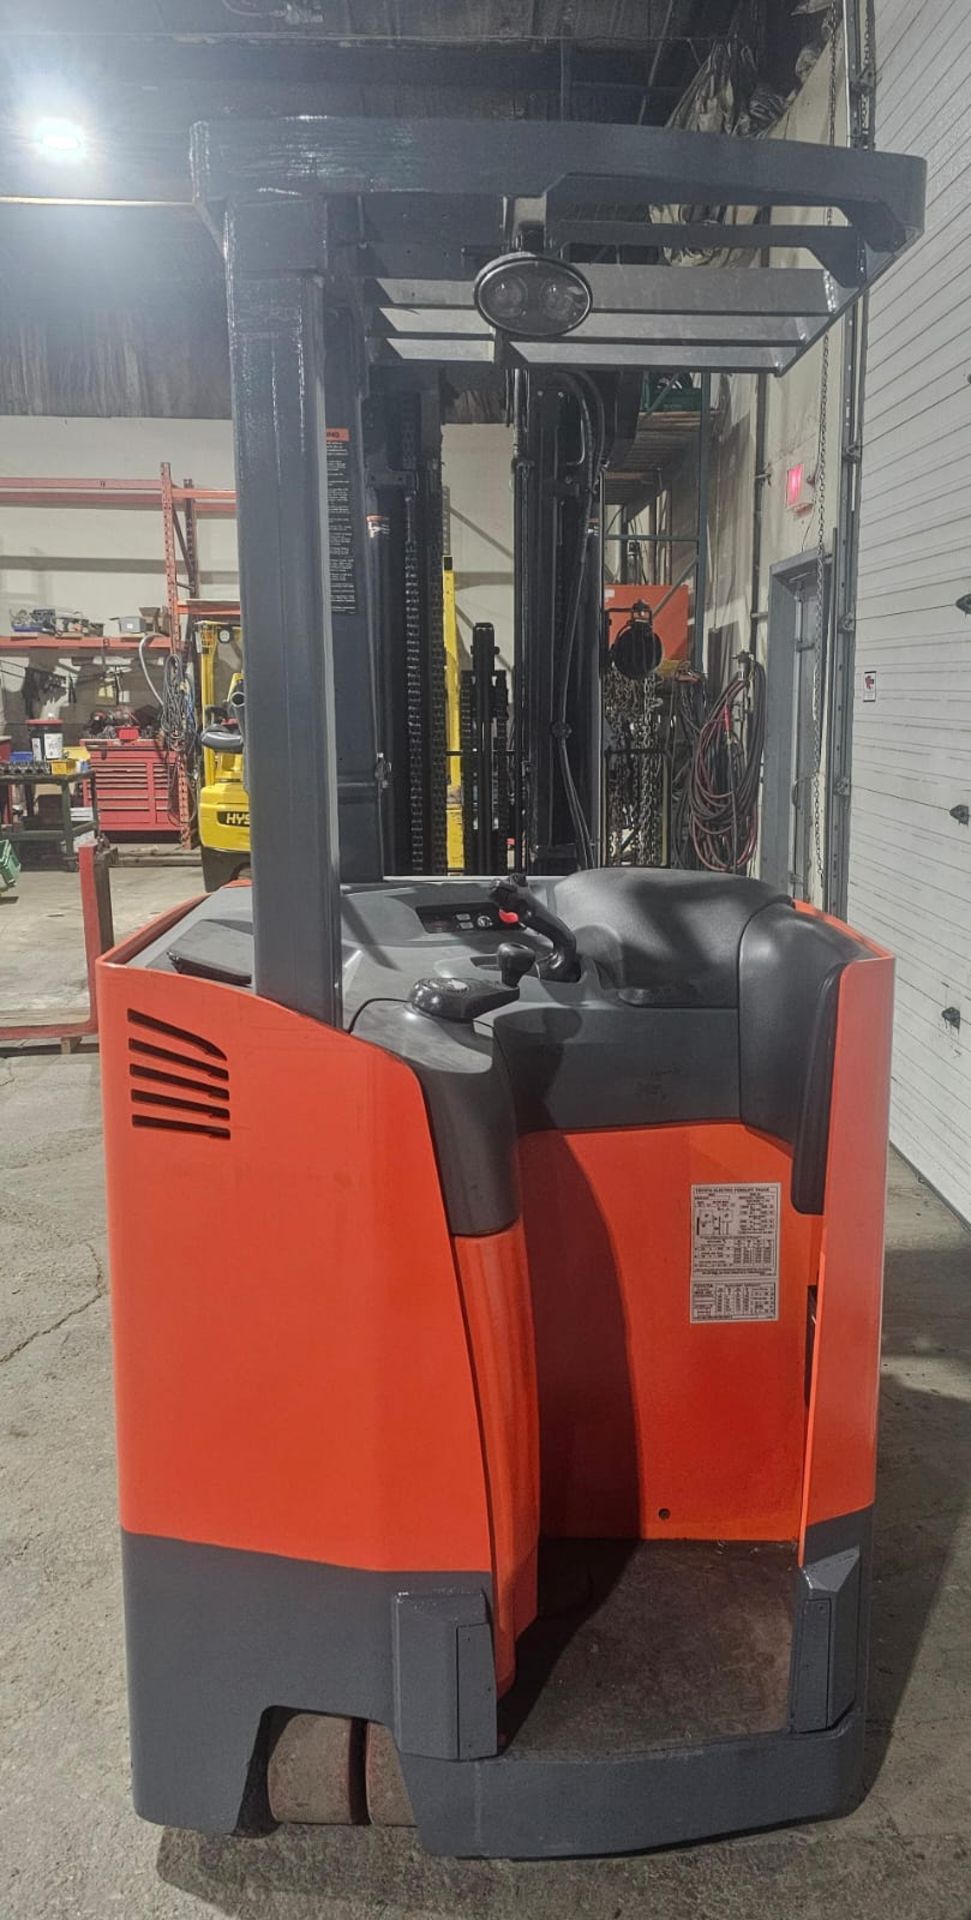 2017 Toyota 4,000lbs Capacity Forklift Electric 36V with sideshift & 4-STAGE MAST 276" max load - Image 4 of 9